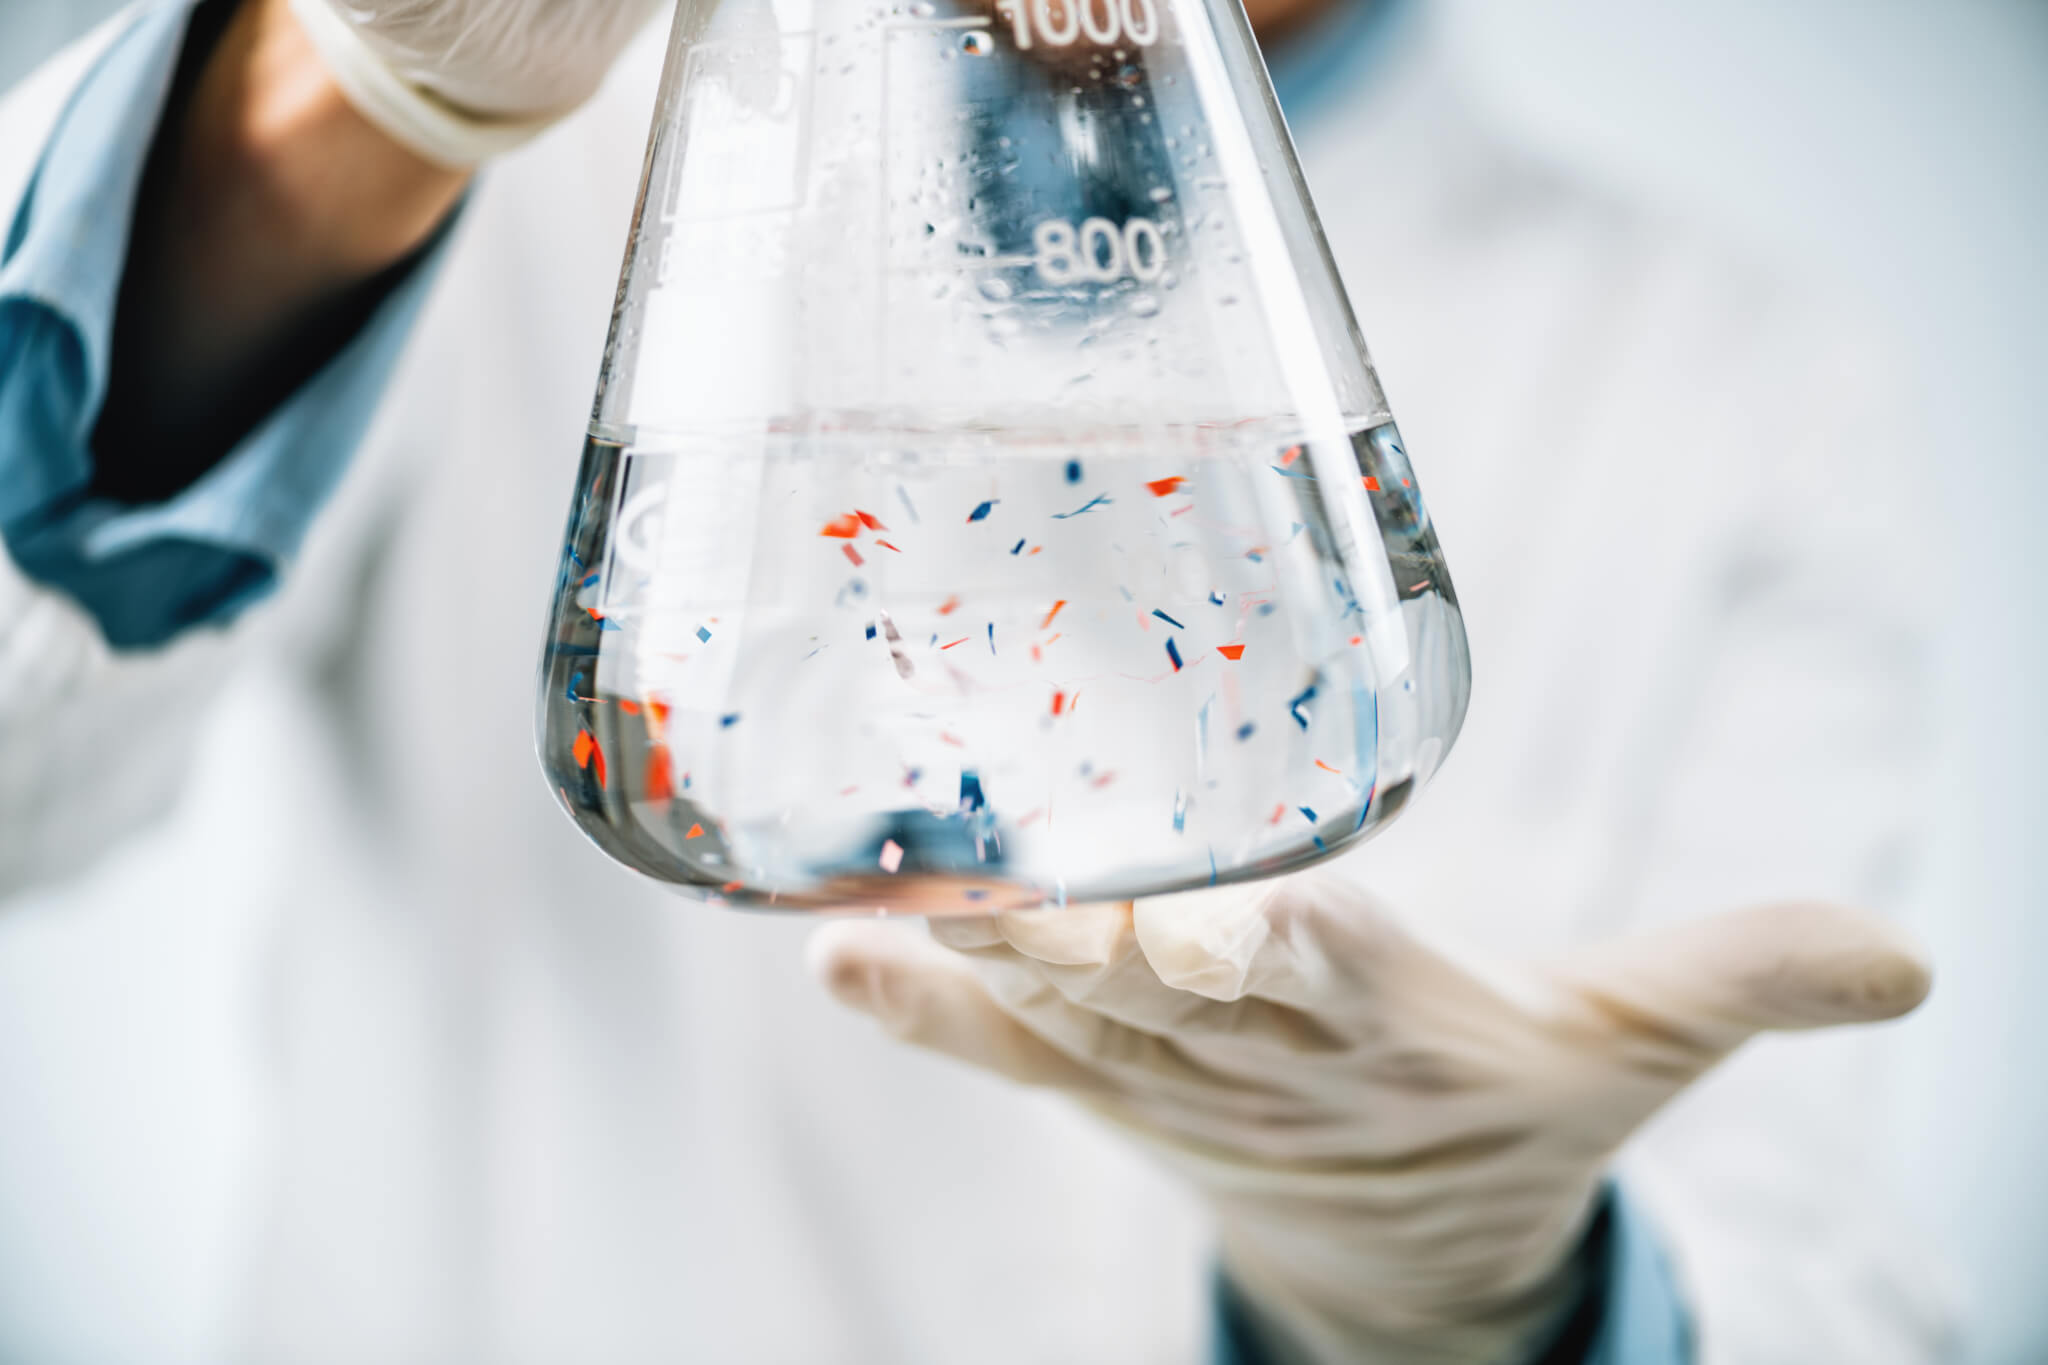 Microplastics in beaker filled with water